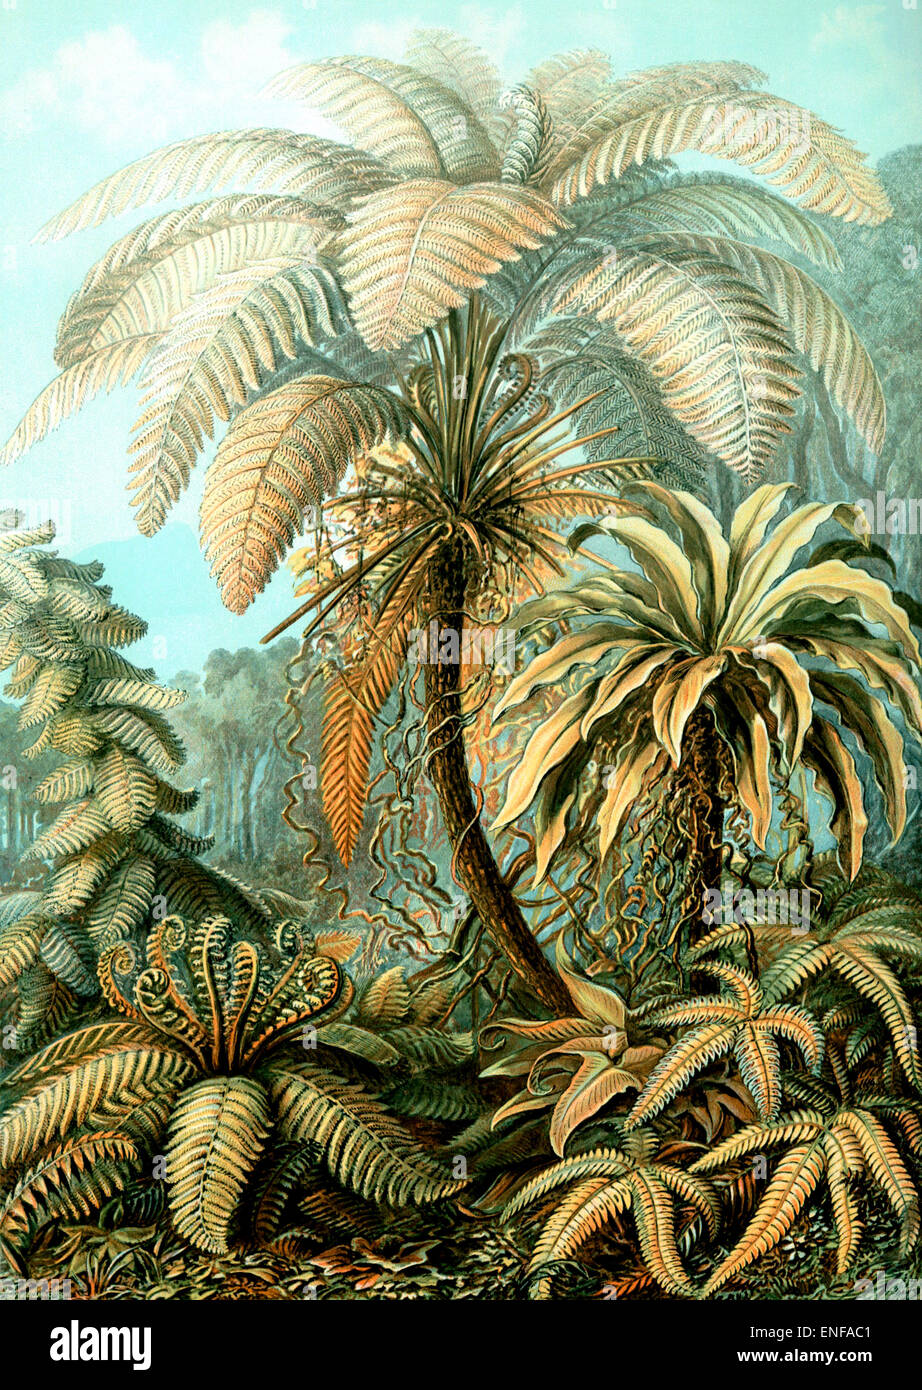 Filicinae (Ferns), by Ernst Haeckel, 1904 - Editorial use only. Stock Photo